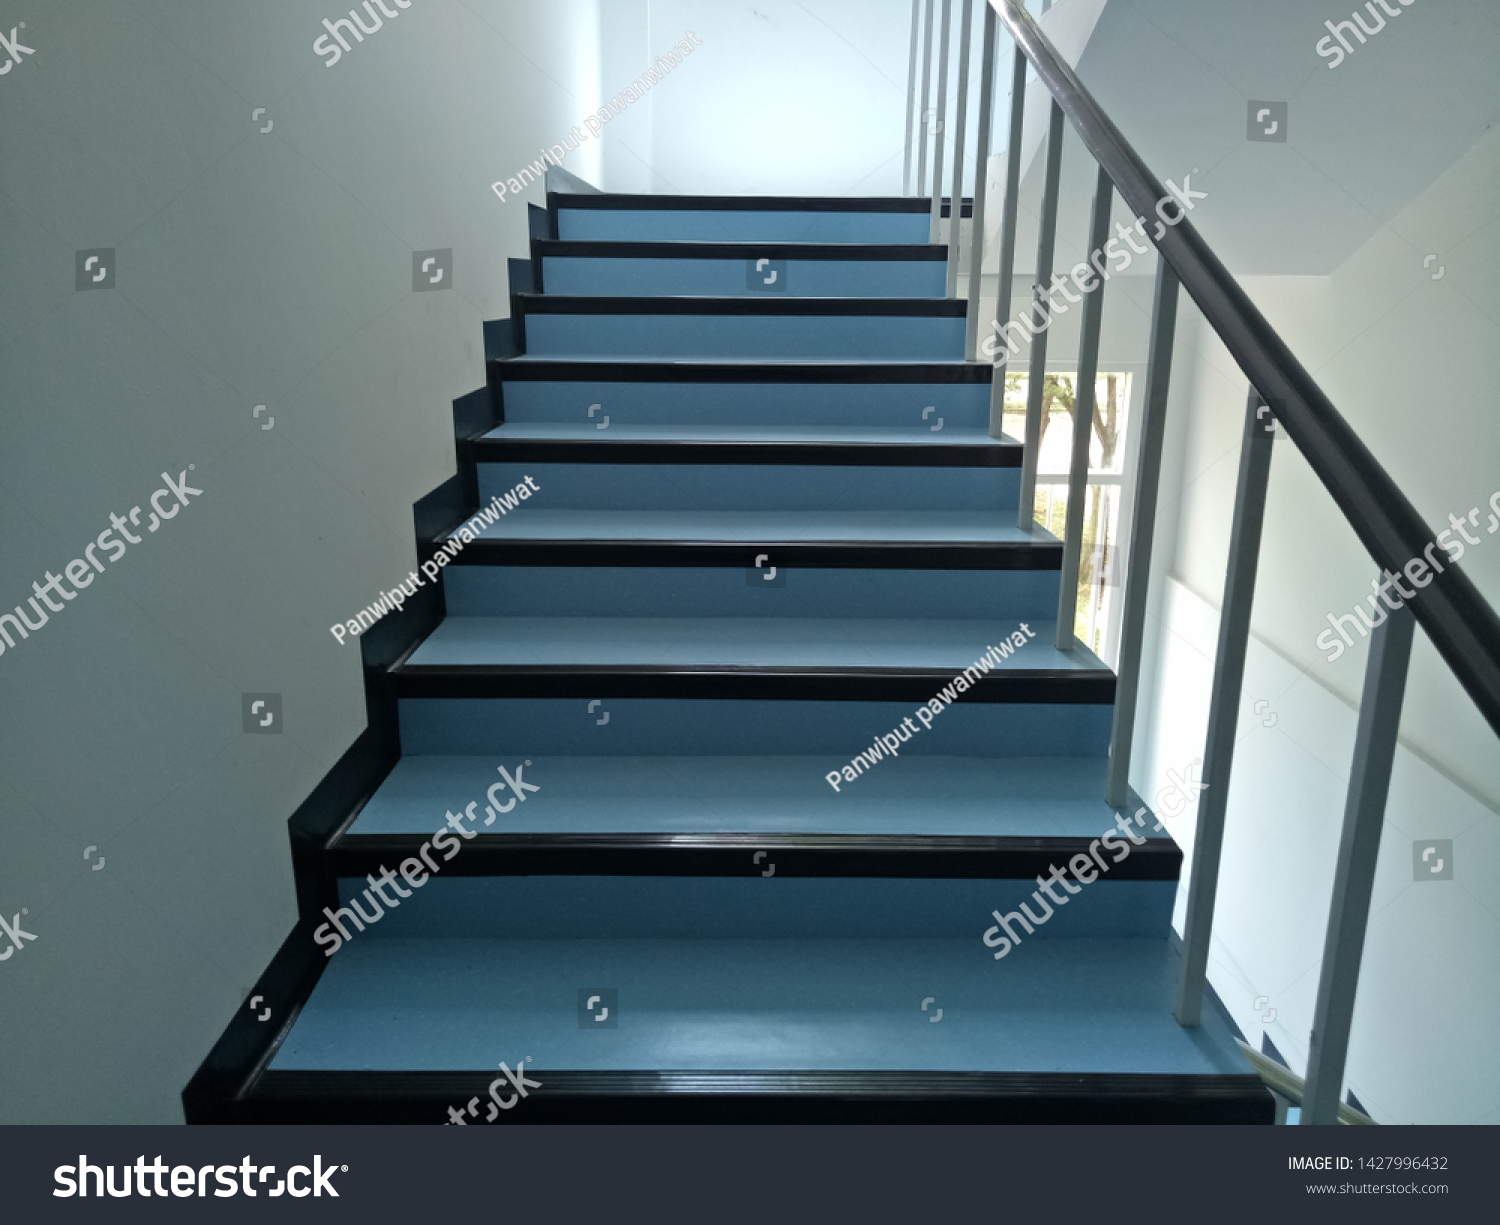 Walkway.Blue stairs.Narrow stairs.Walls and stairs.Stairs inside the building #1427996432